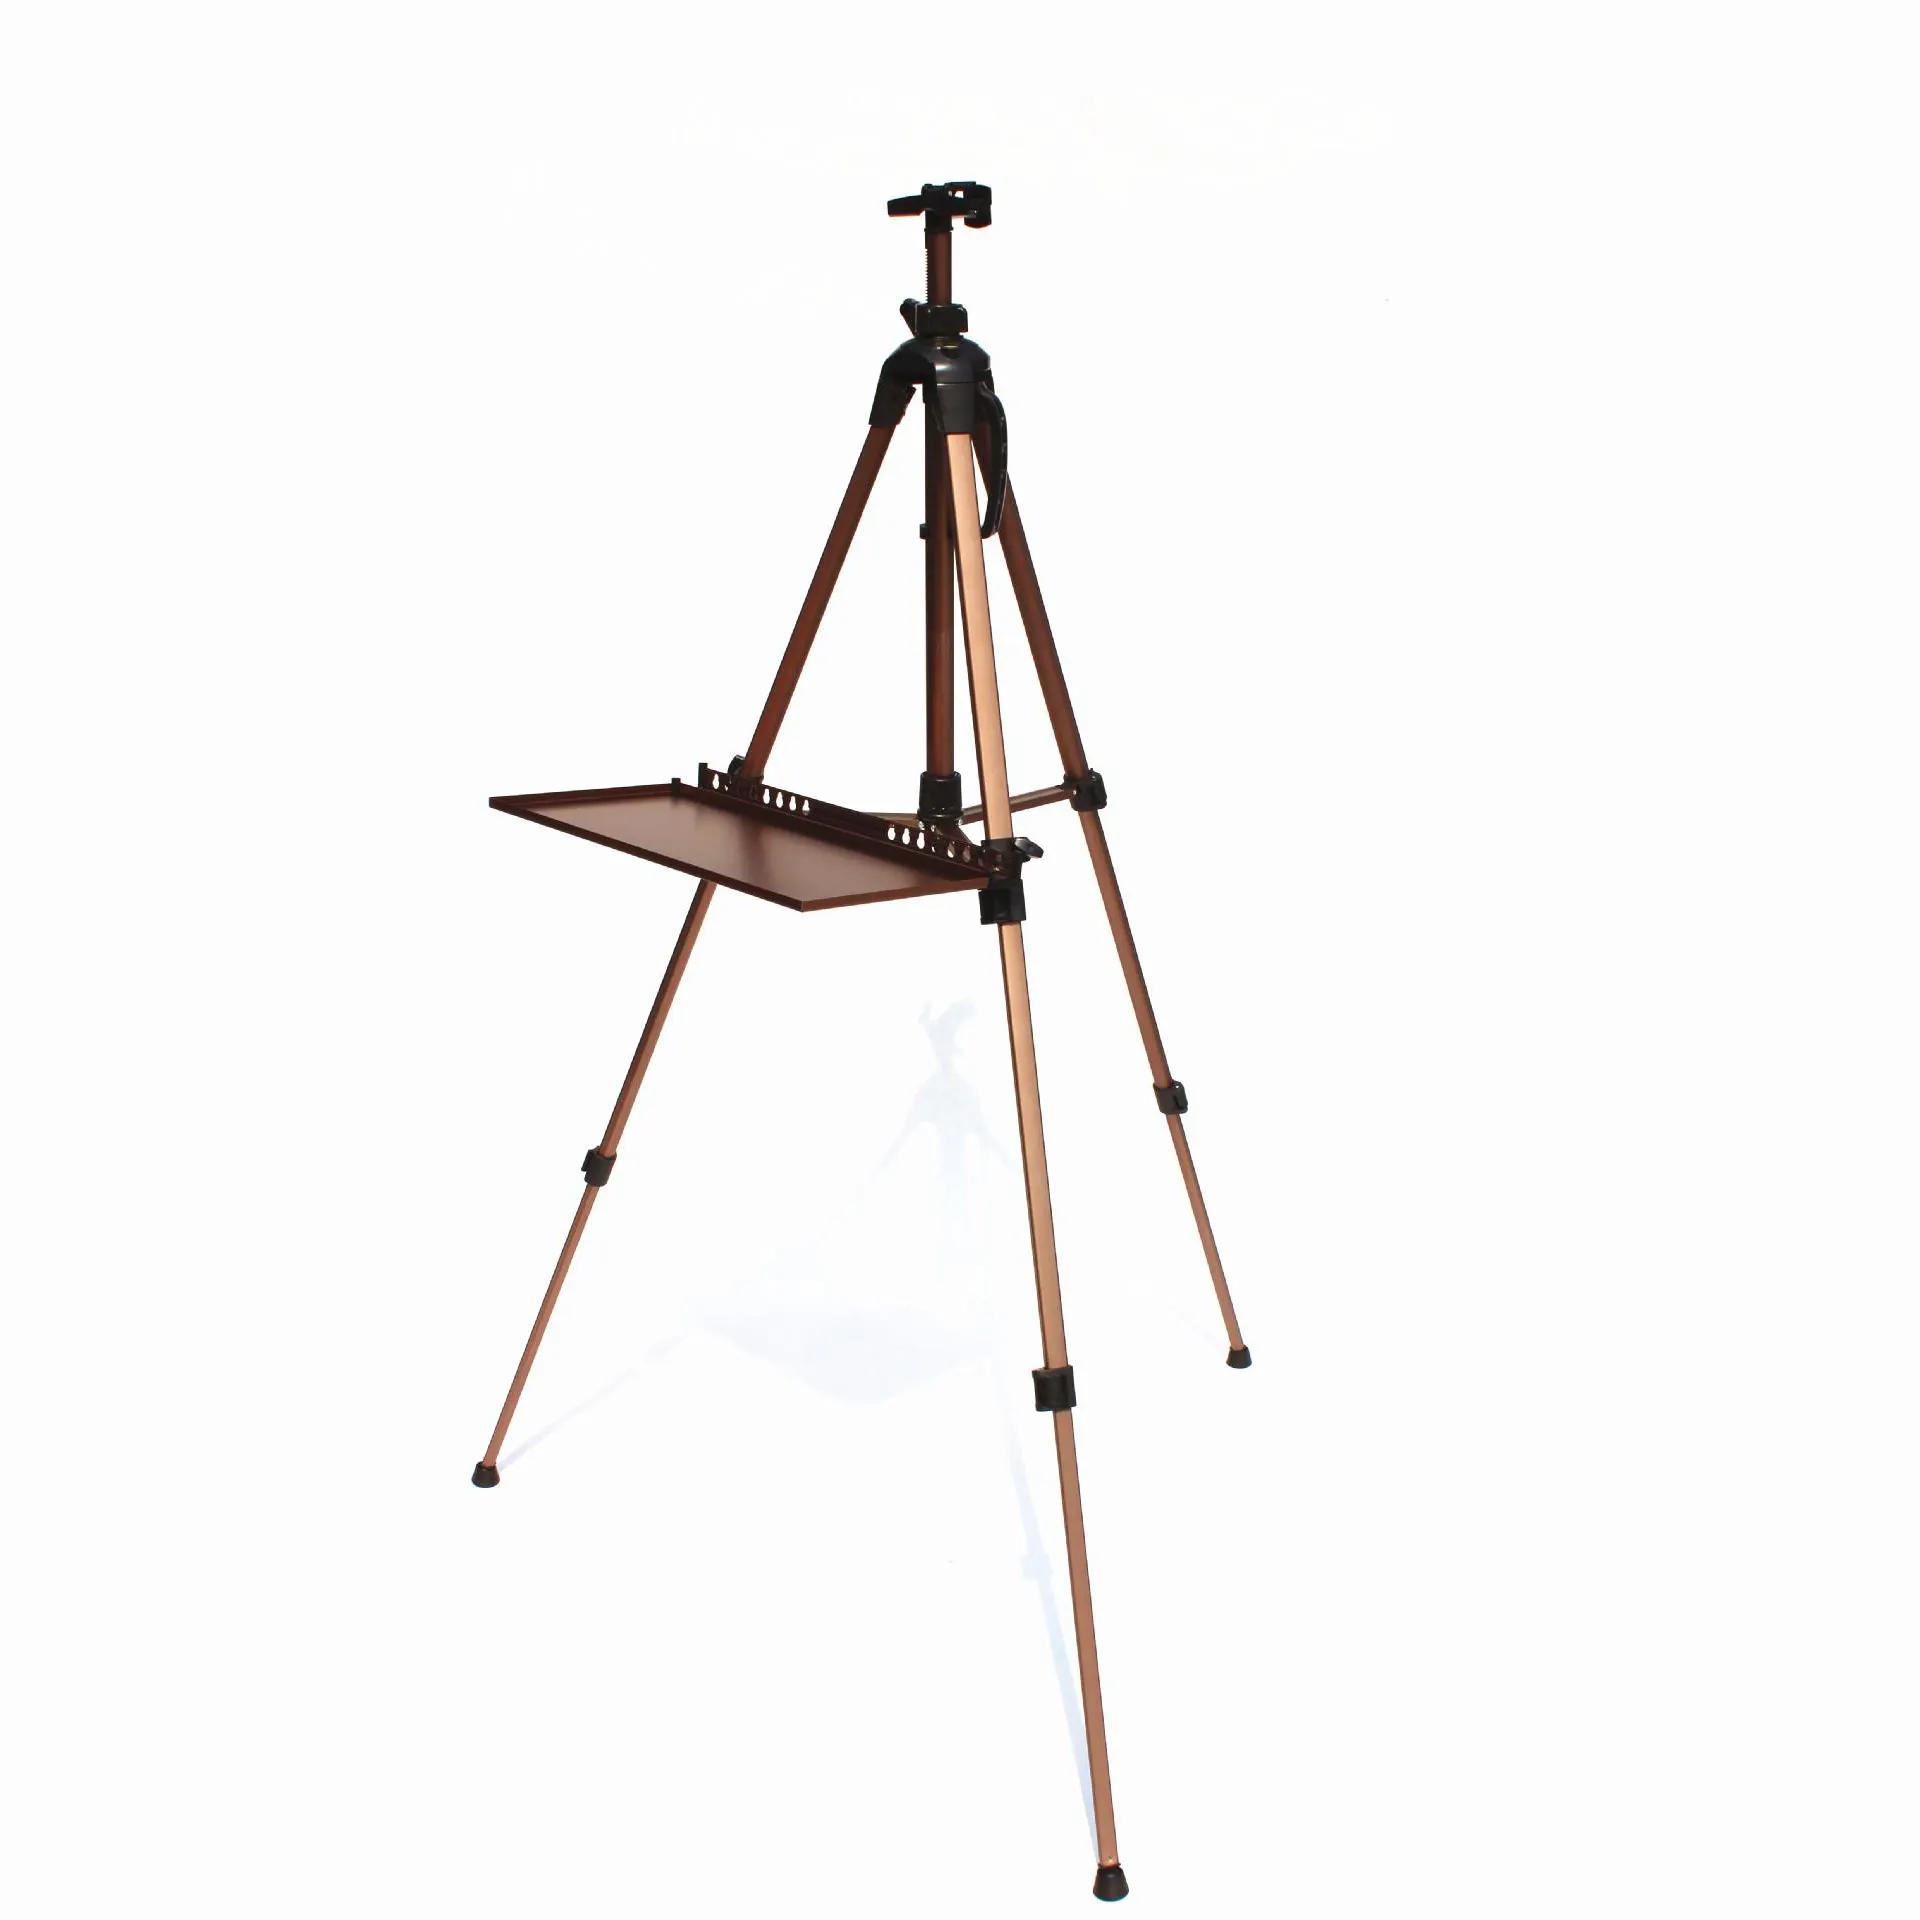 China Art Supplies Adjustable Height 17" to 63" Aluminum Metal Tripod Easel for Table Top & Floor Painting Easel for Display